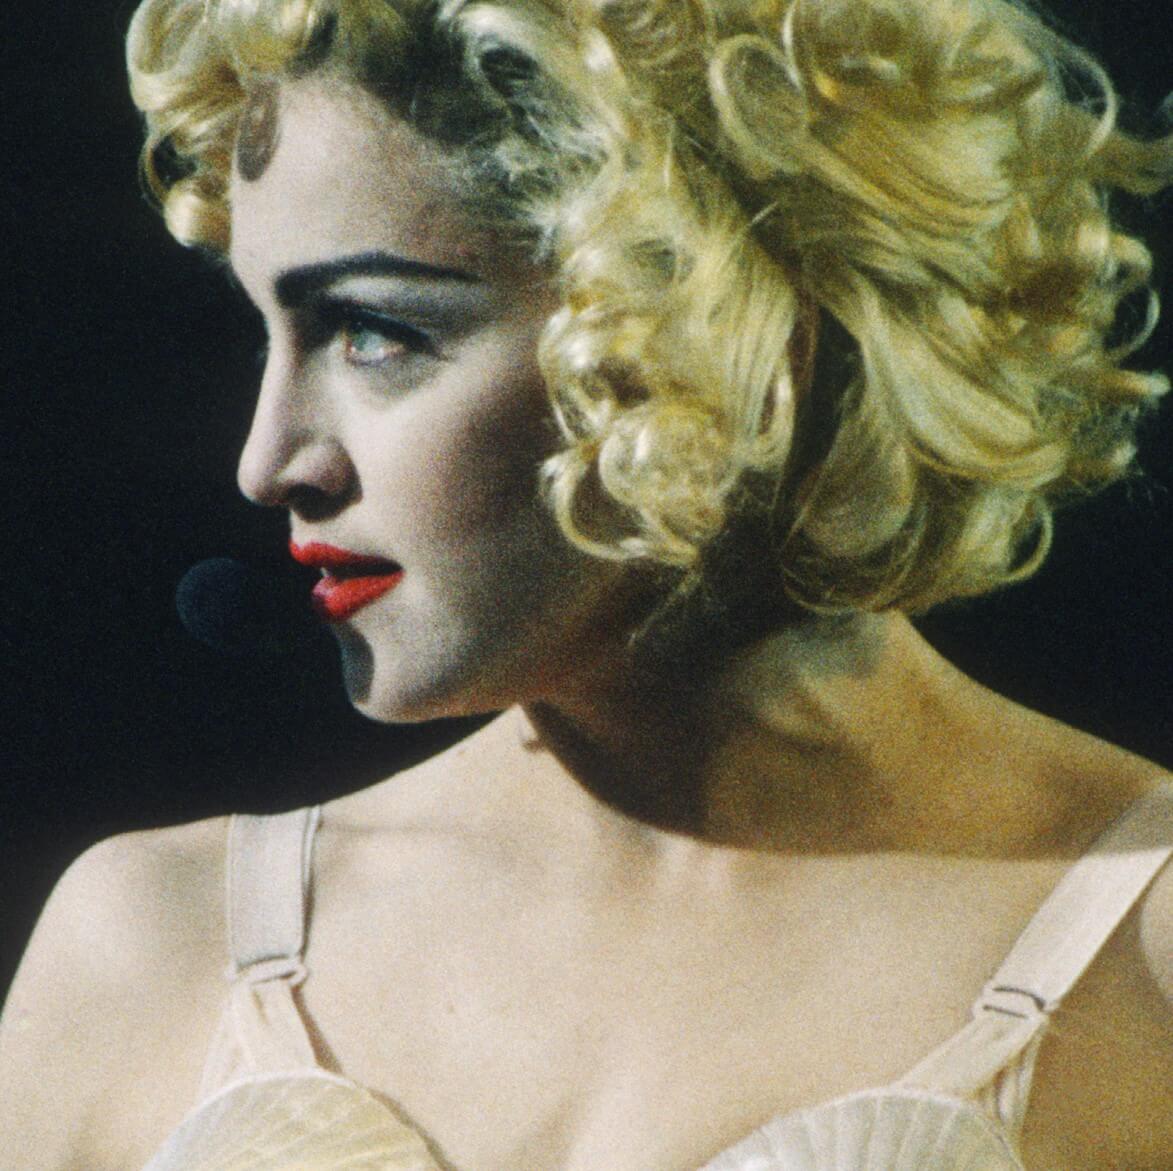 "Live to Tell" singer Madonna wearing lipstick